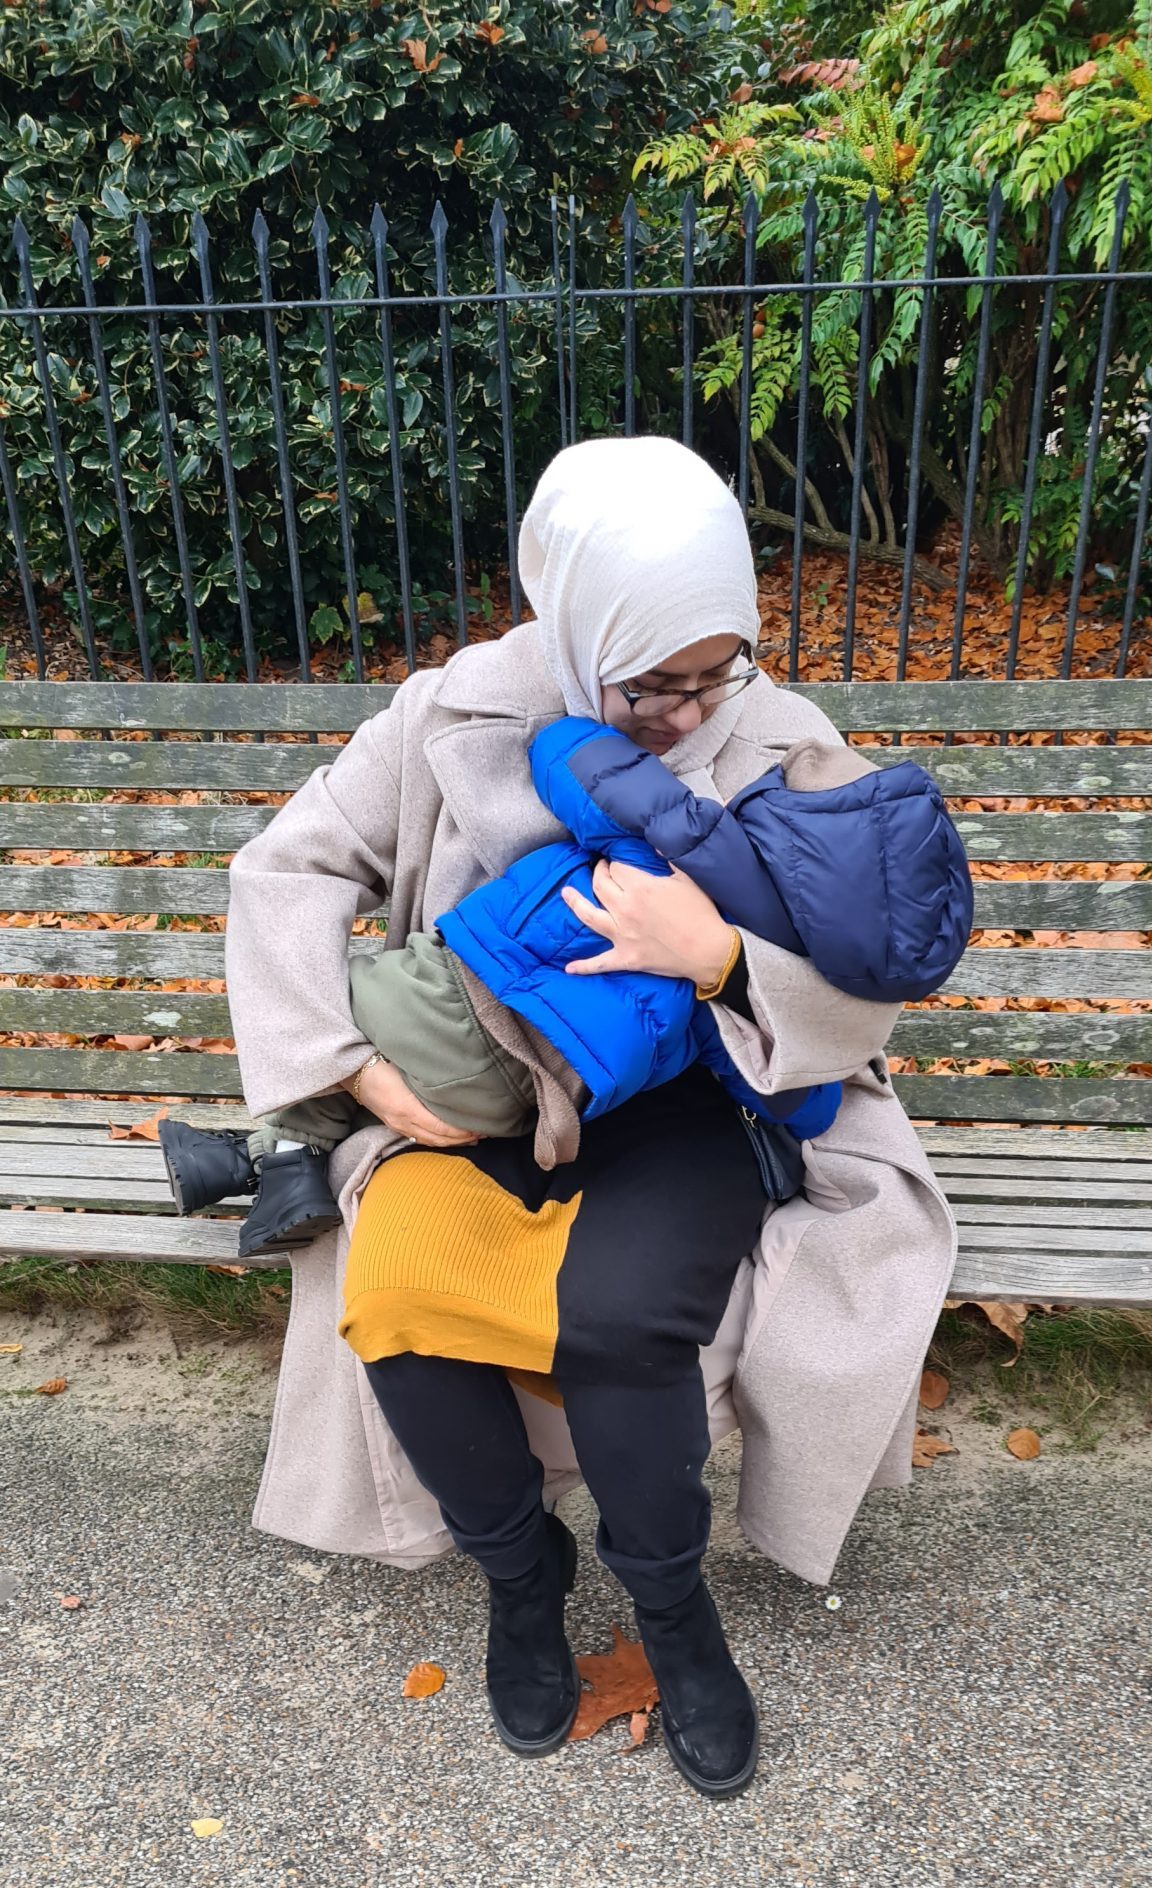 Houda breastfeeding her toddler son outside on a bench